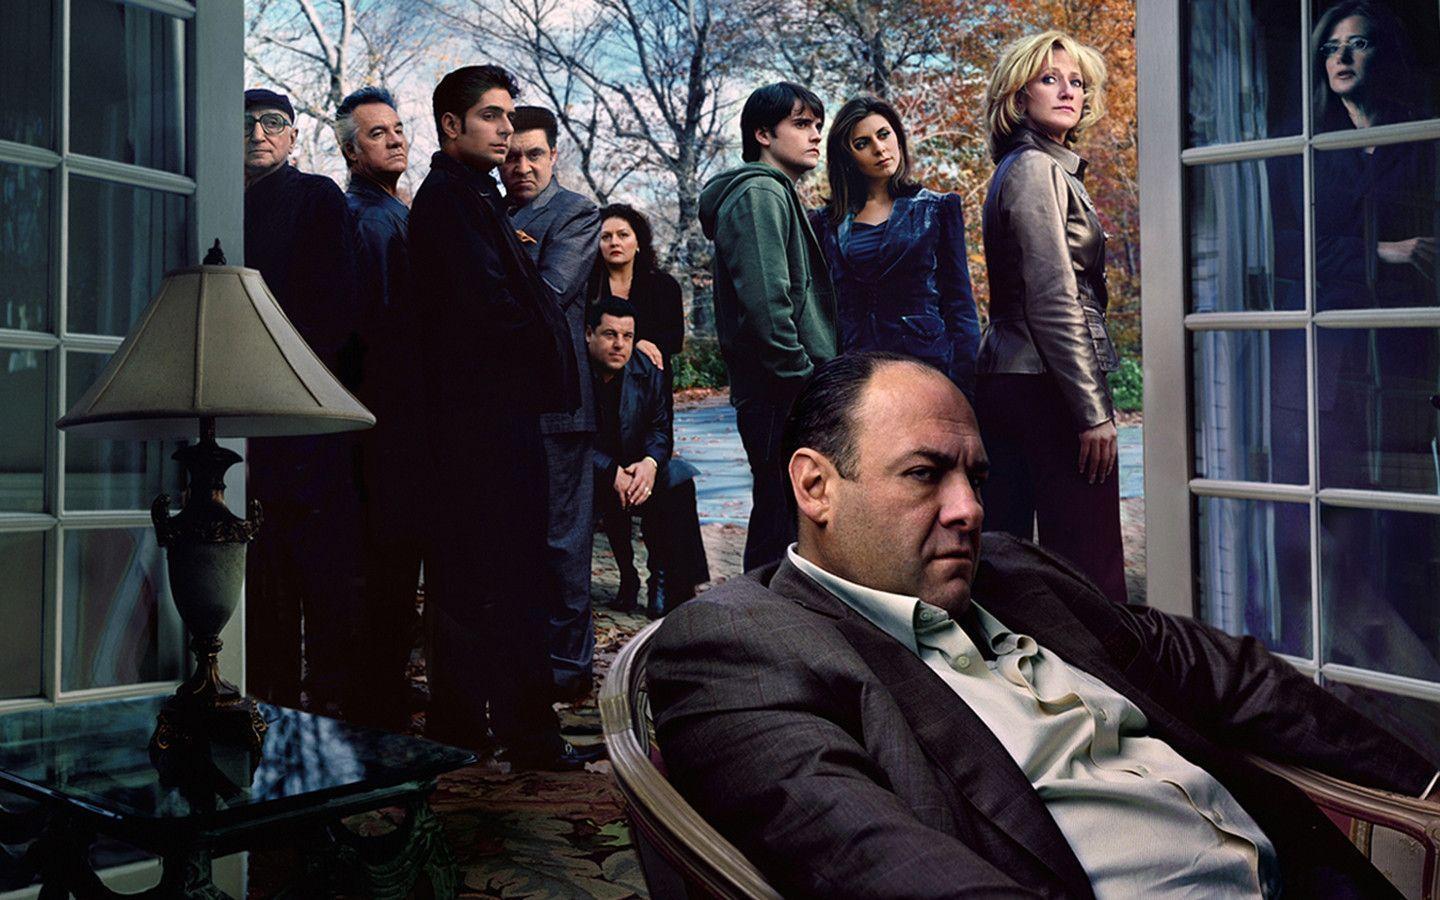 The Sopranos wallpaper by TONYSTARK  Download on ZEDGE  1f90